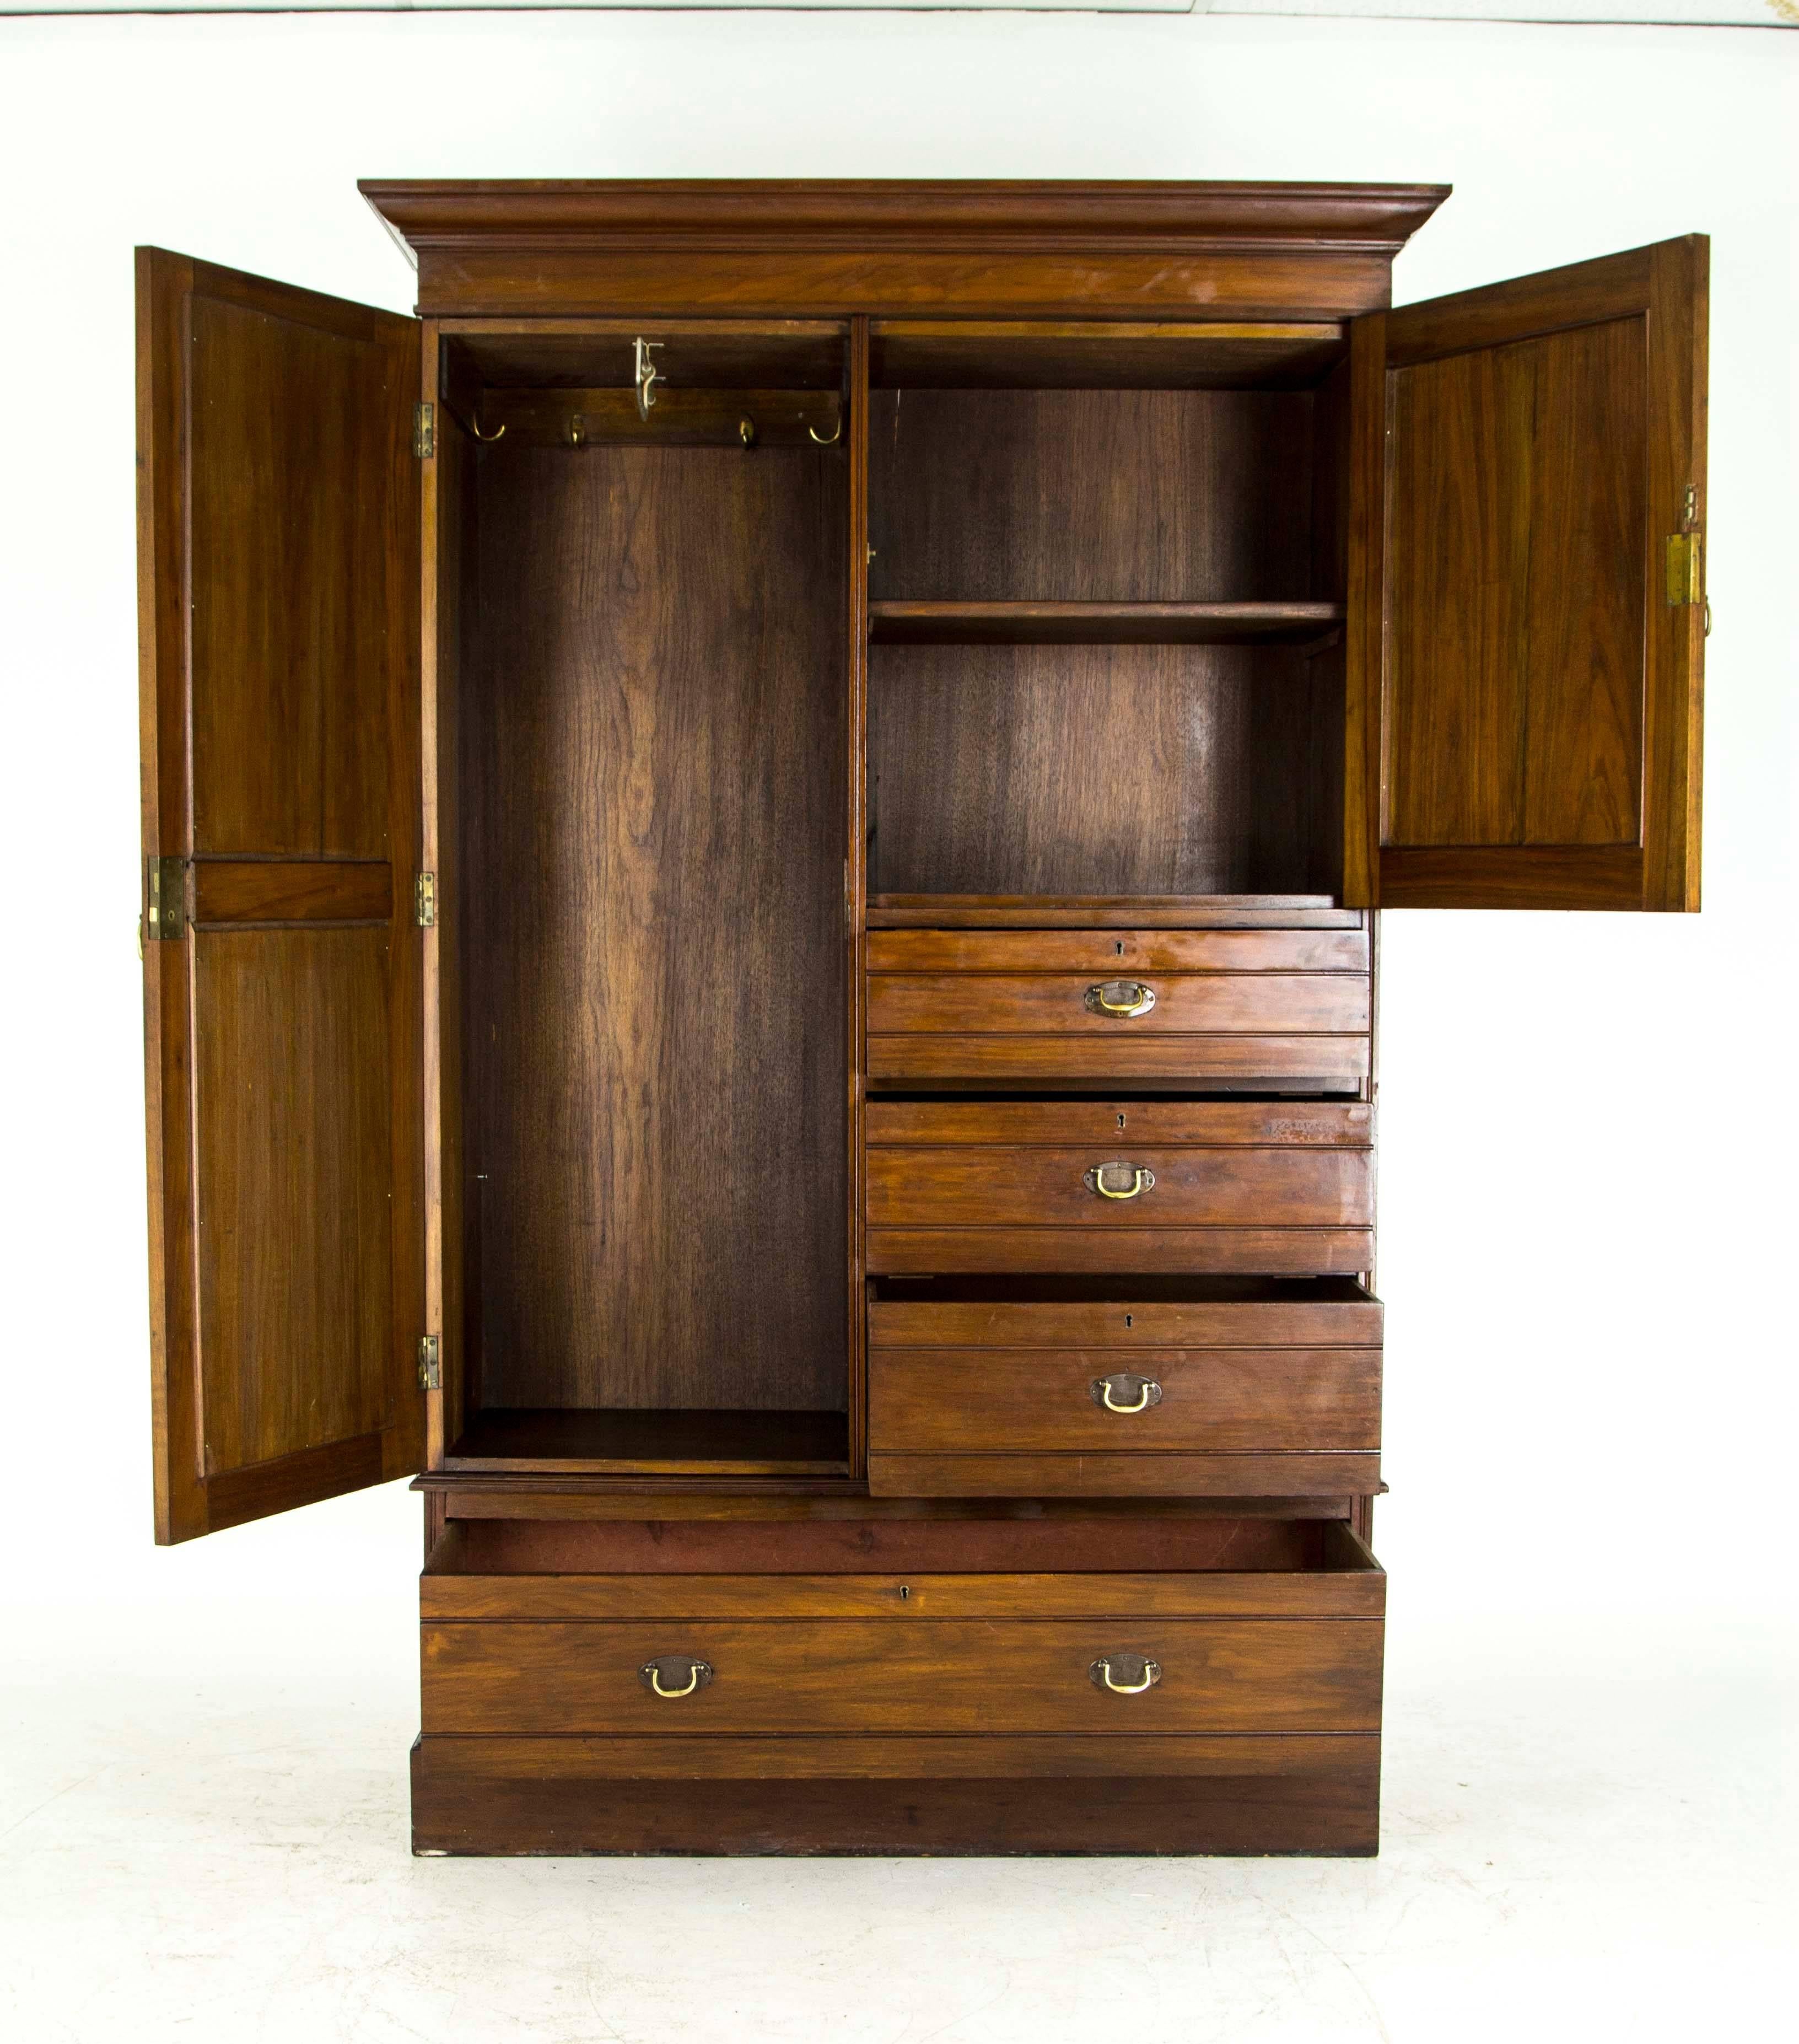 Scotland. 
1880.
Solid mahogany.
Shaped cornice above.
Carved panel door with single shelf.
Three dovetailed drawers to the right.
Full length beveled mirror to the left with hooks and hanging bar.
Full drawer below.
Ending on a Plinth